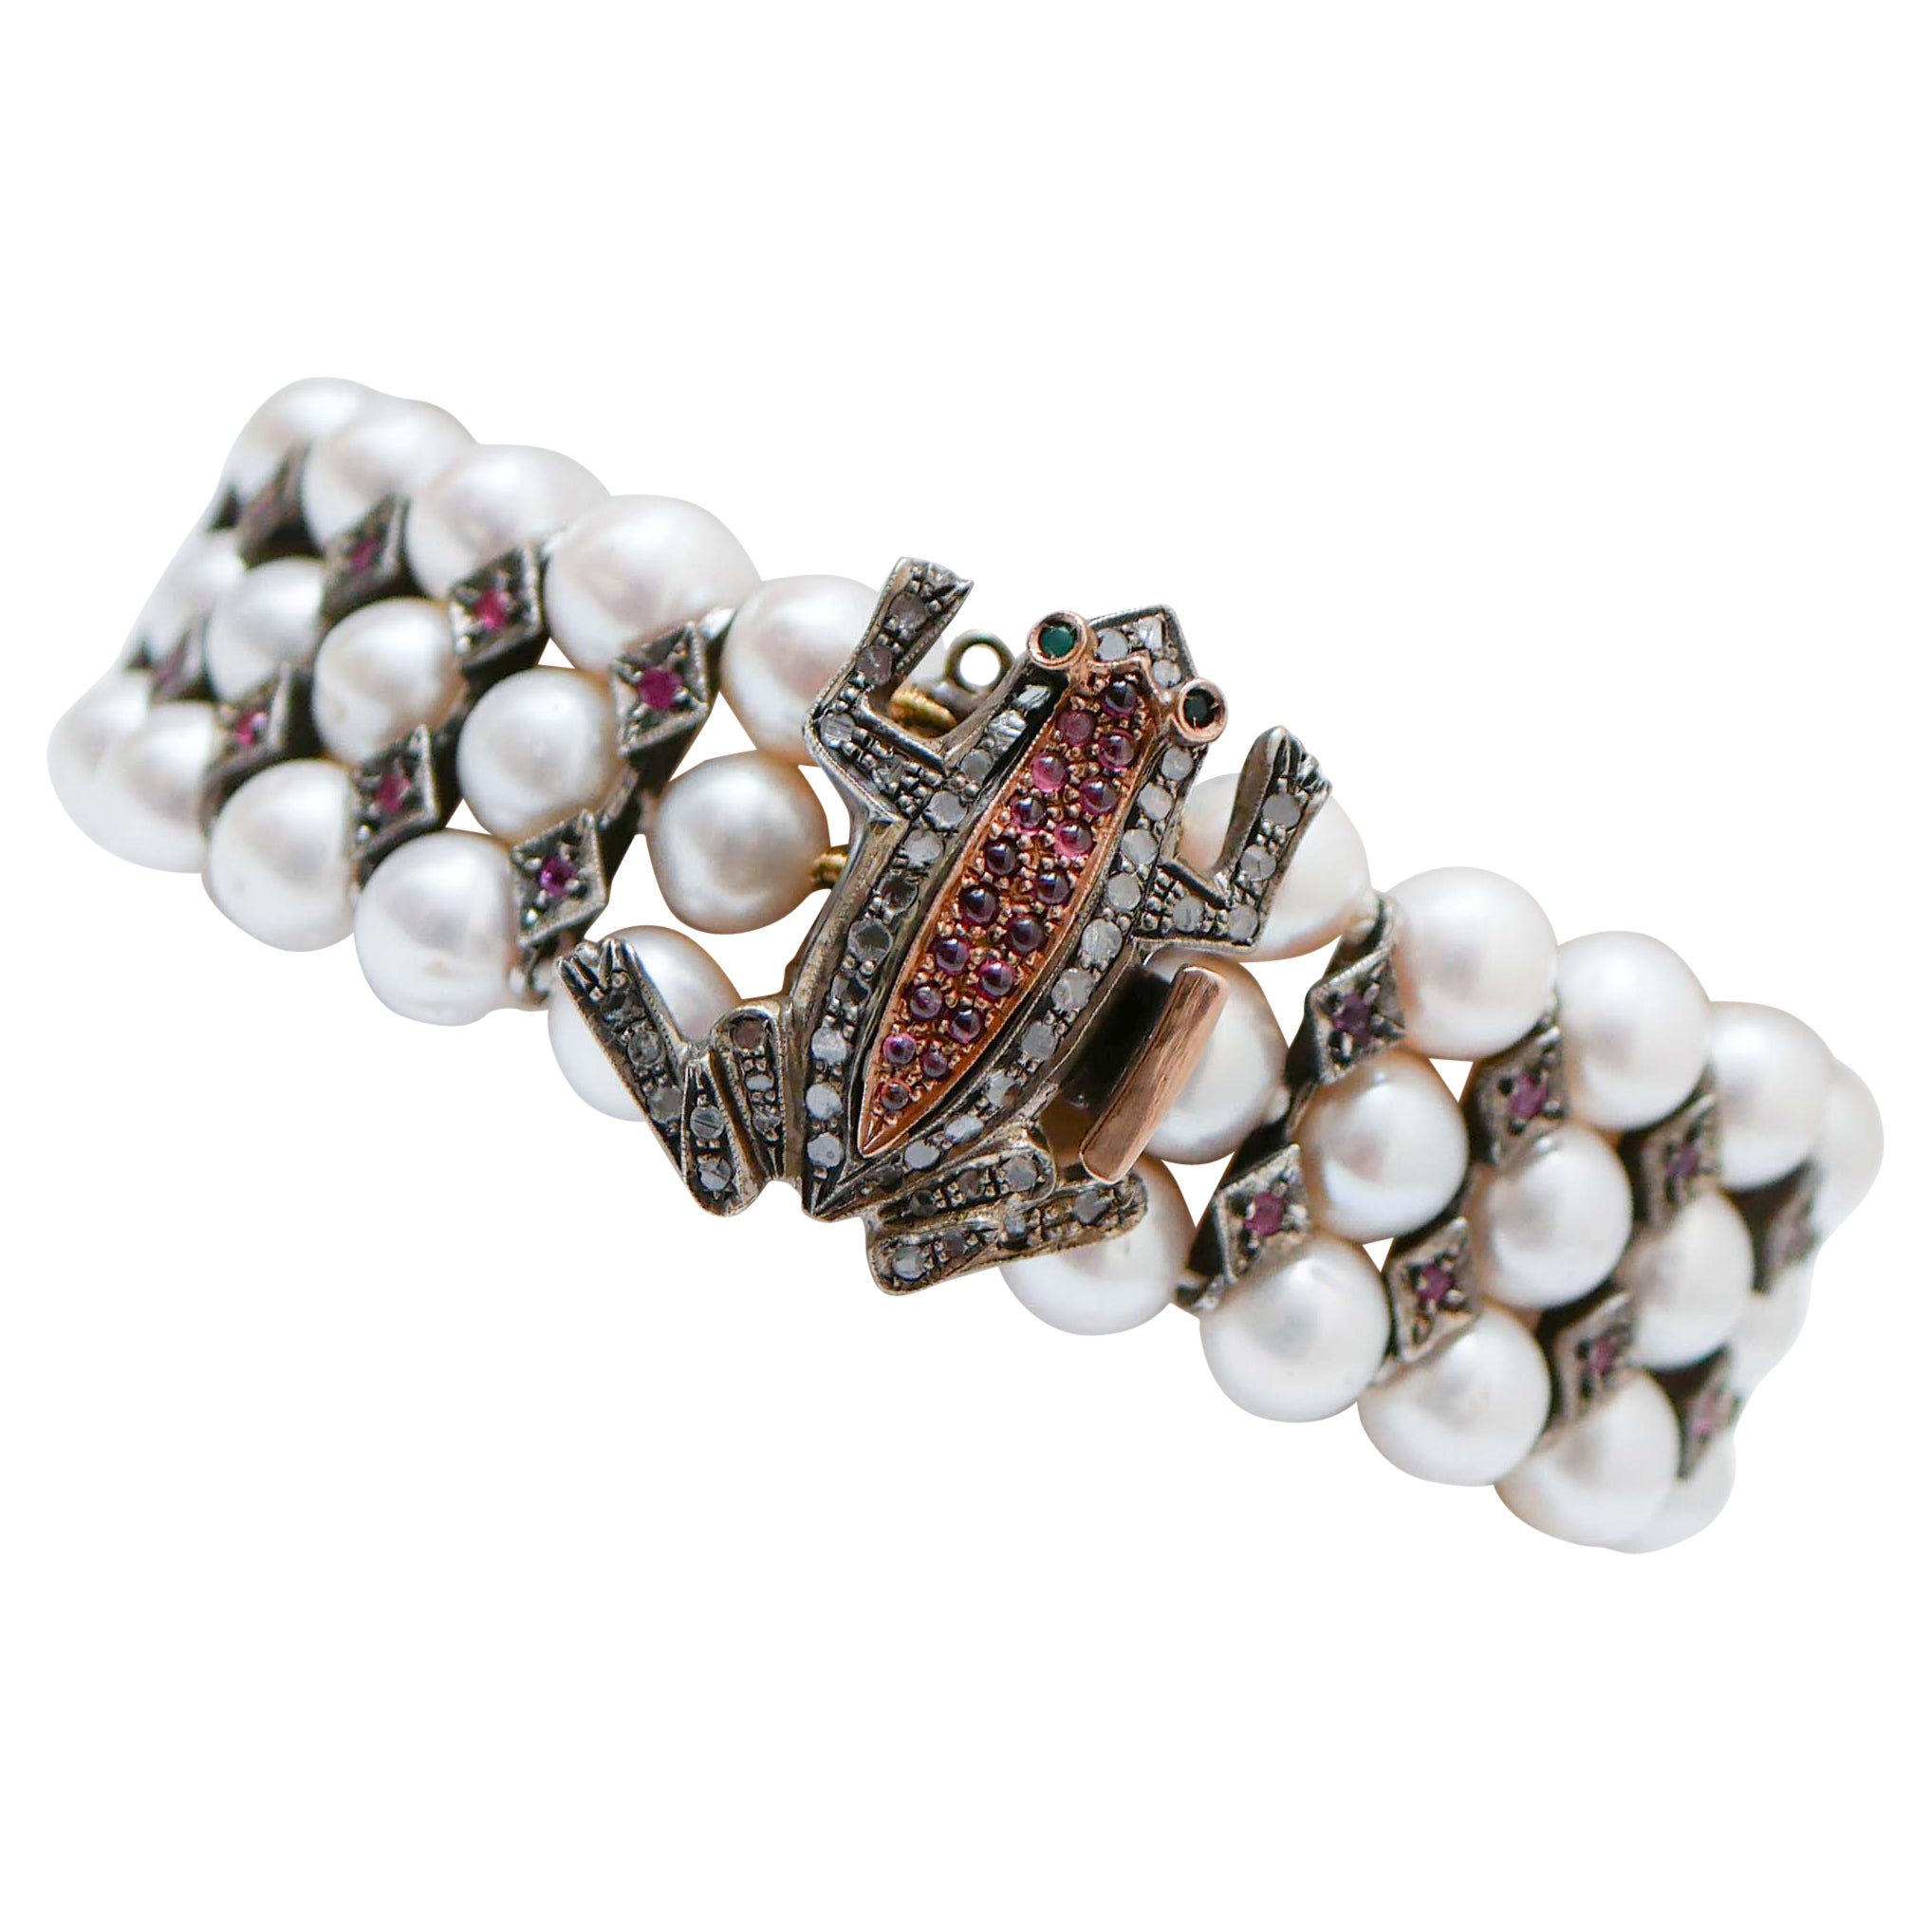 Pearls, Garnets, Rubies, Diamonds, Rose Gold and Silver Frog Bracelet